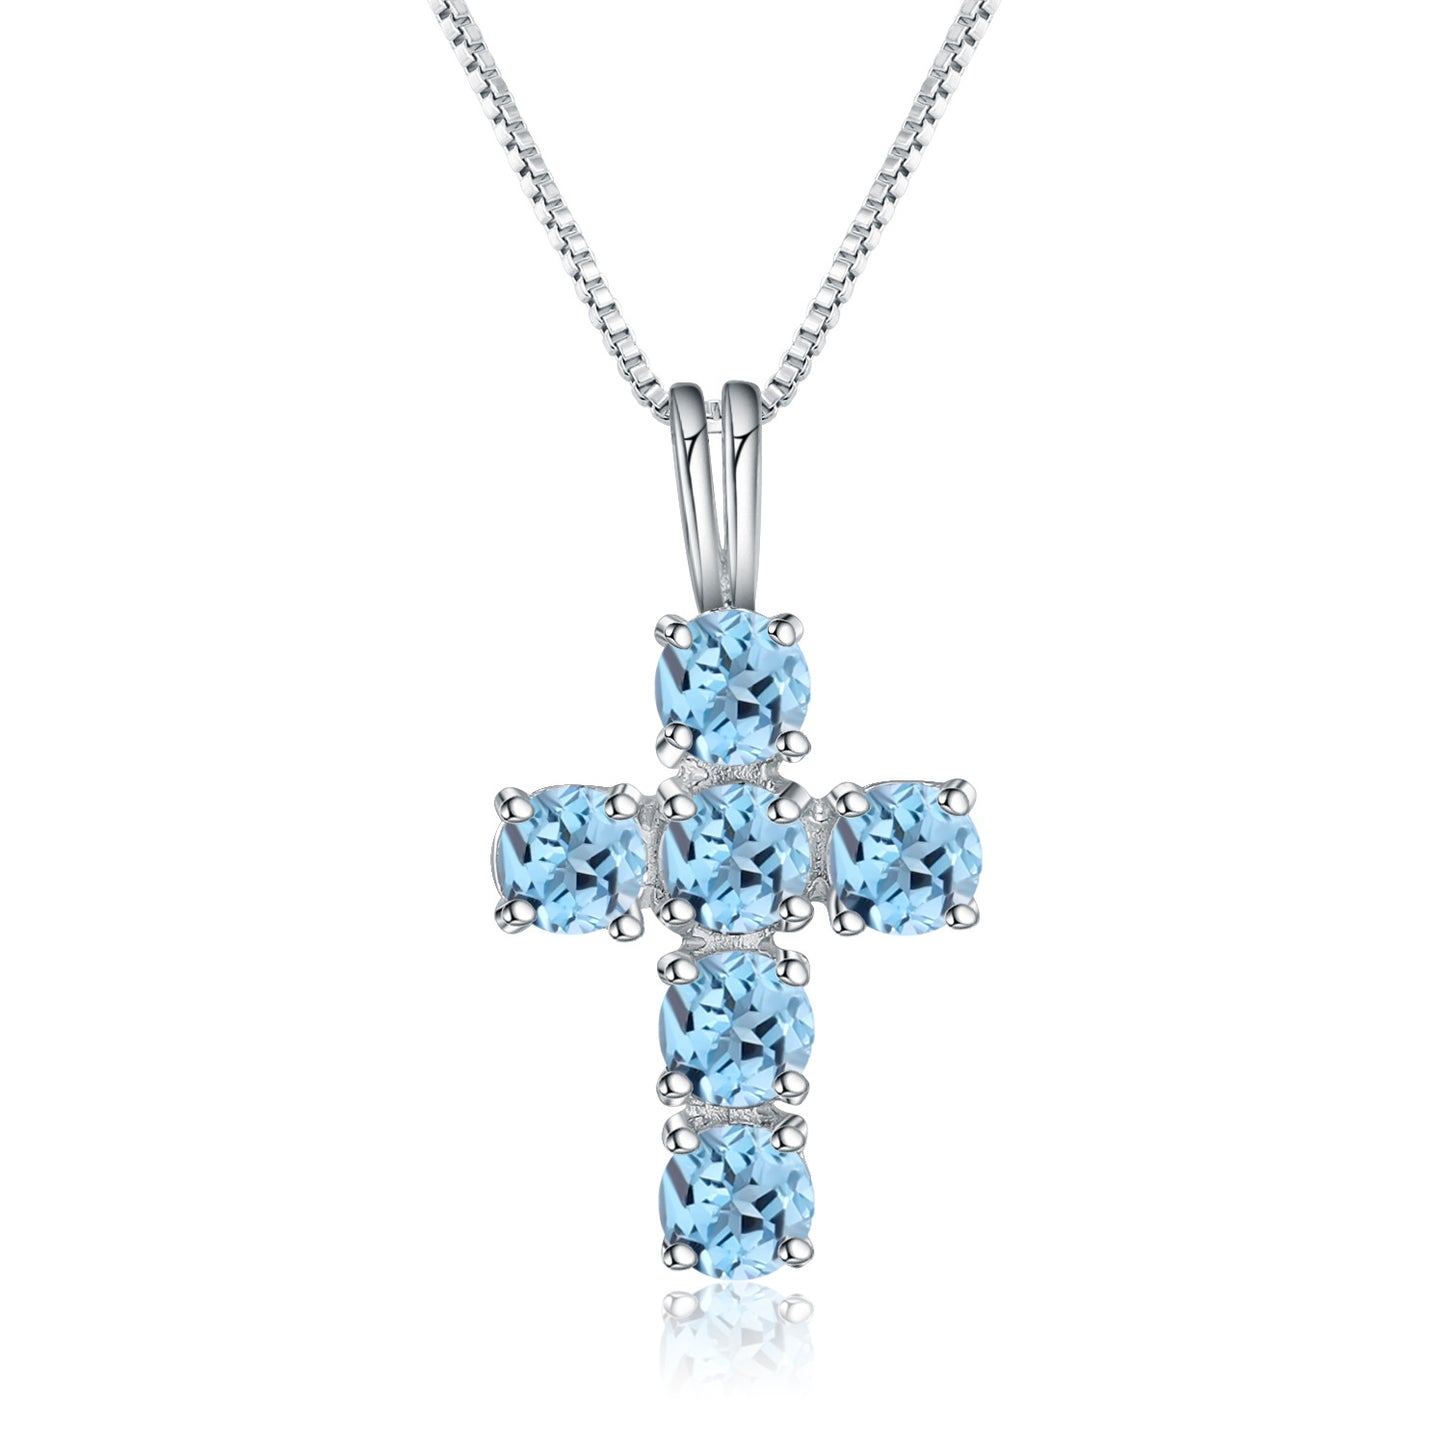 European Luxury Fashion Style Inlaid Natural Topaz Cross Pendant Silver Necklace for Women